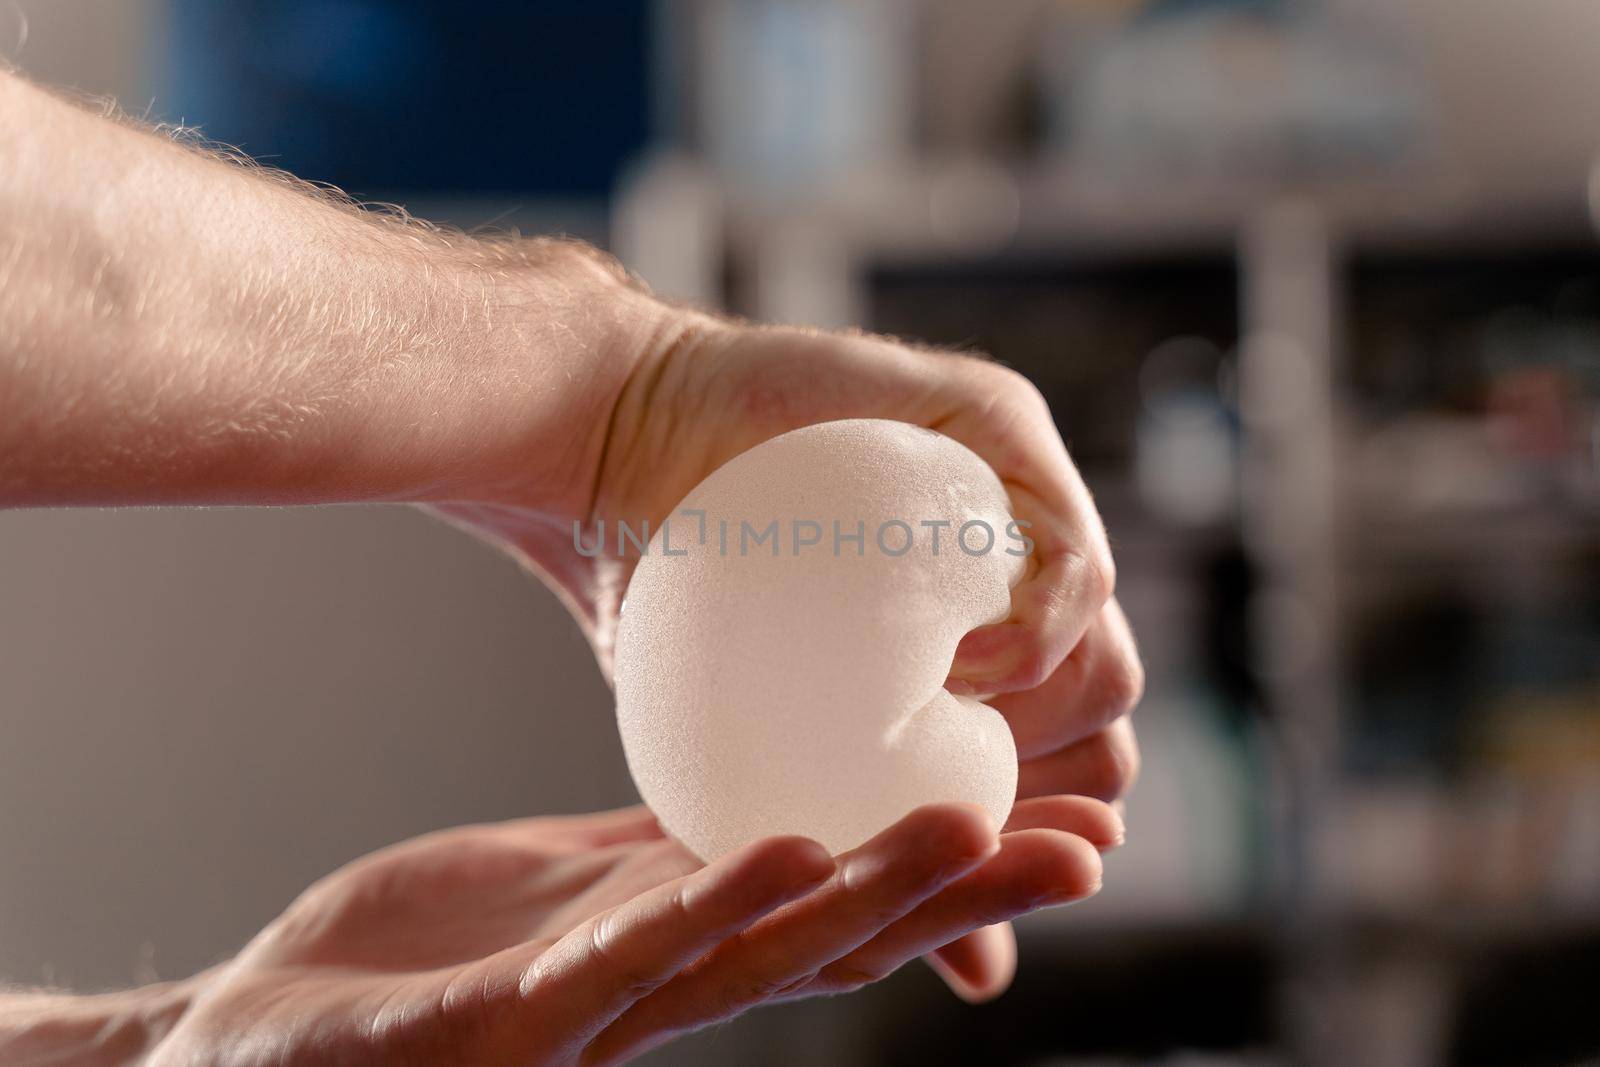 The surgeon touches and squeezes the silicone implants for quality control. Breast augmentation and lift surgery.